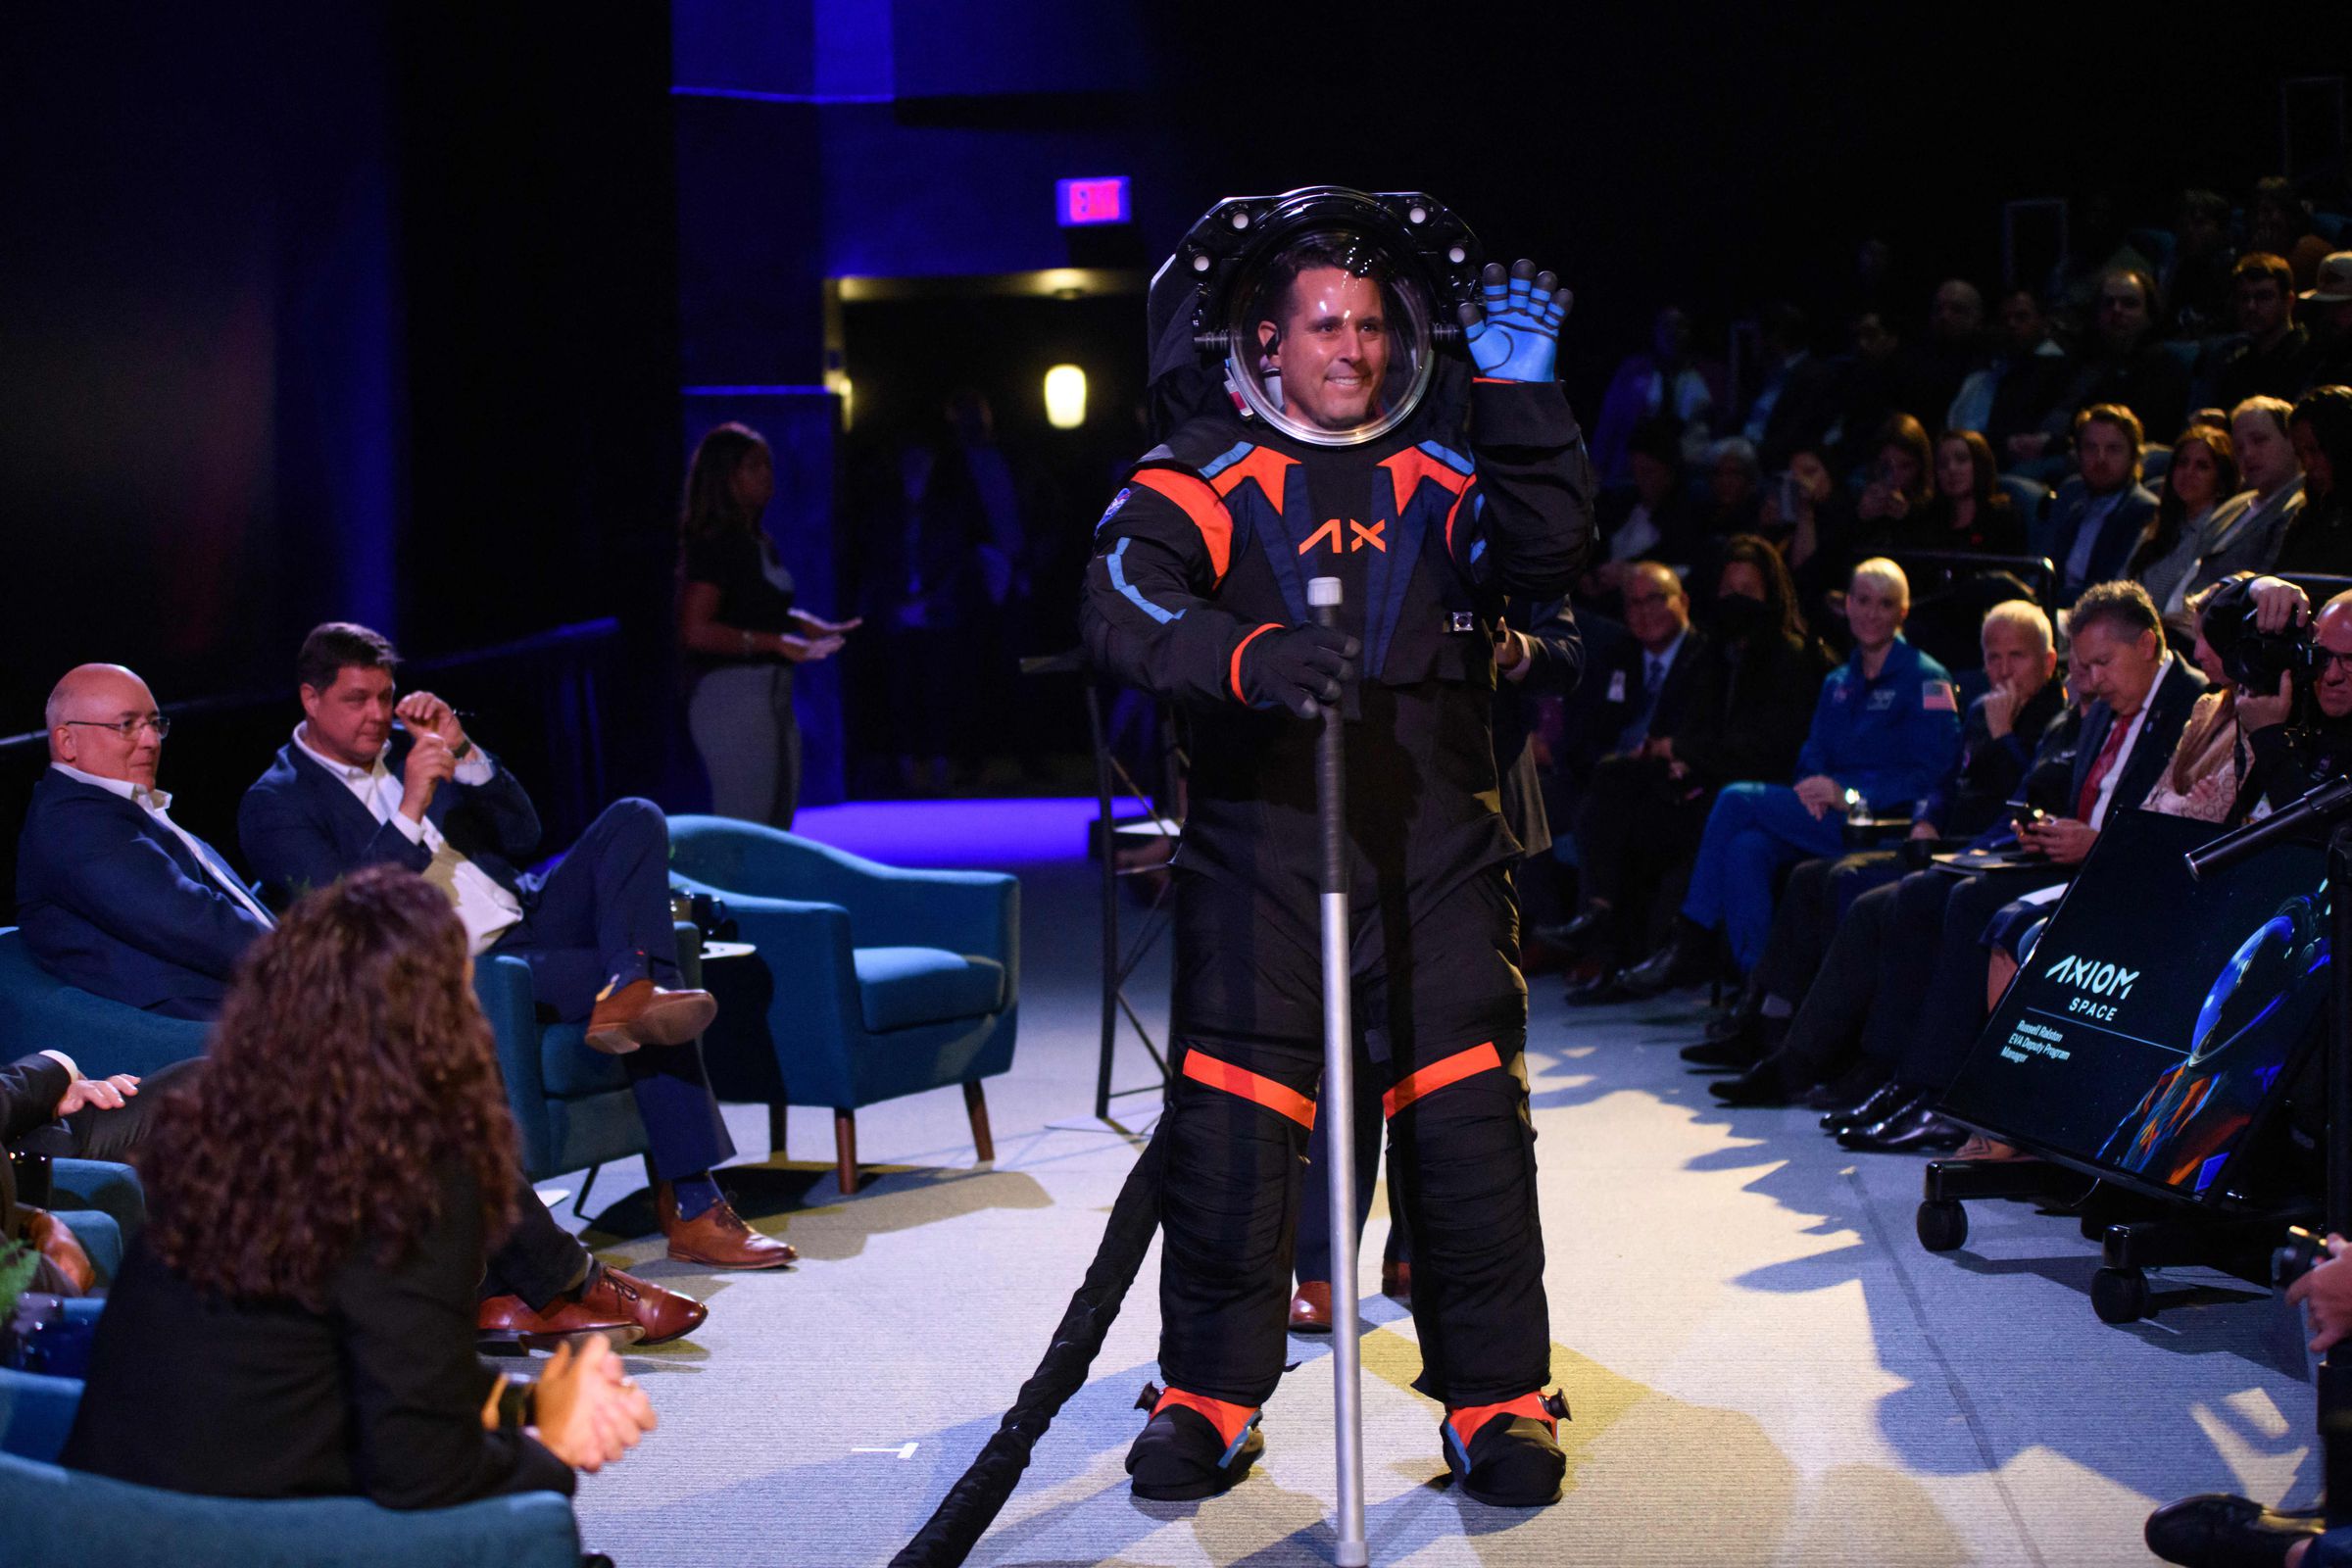 Axiom Space’s new spacesuit for Artemis III astronauts